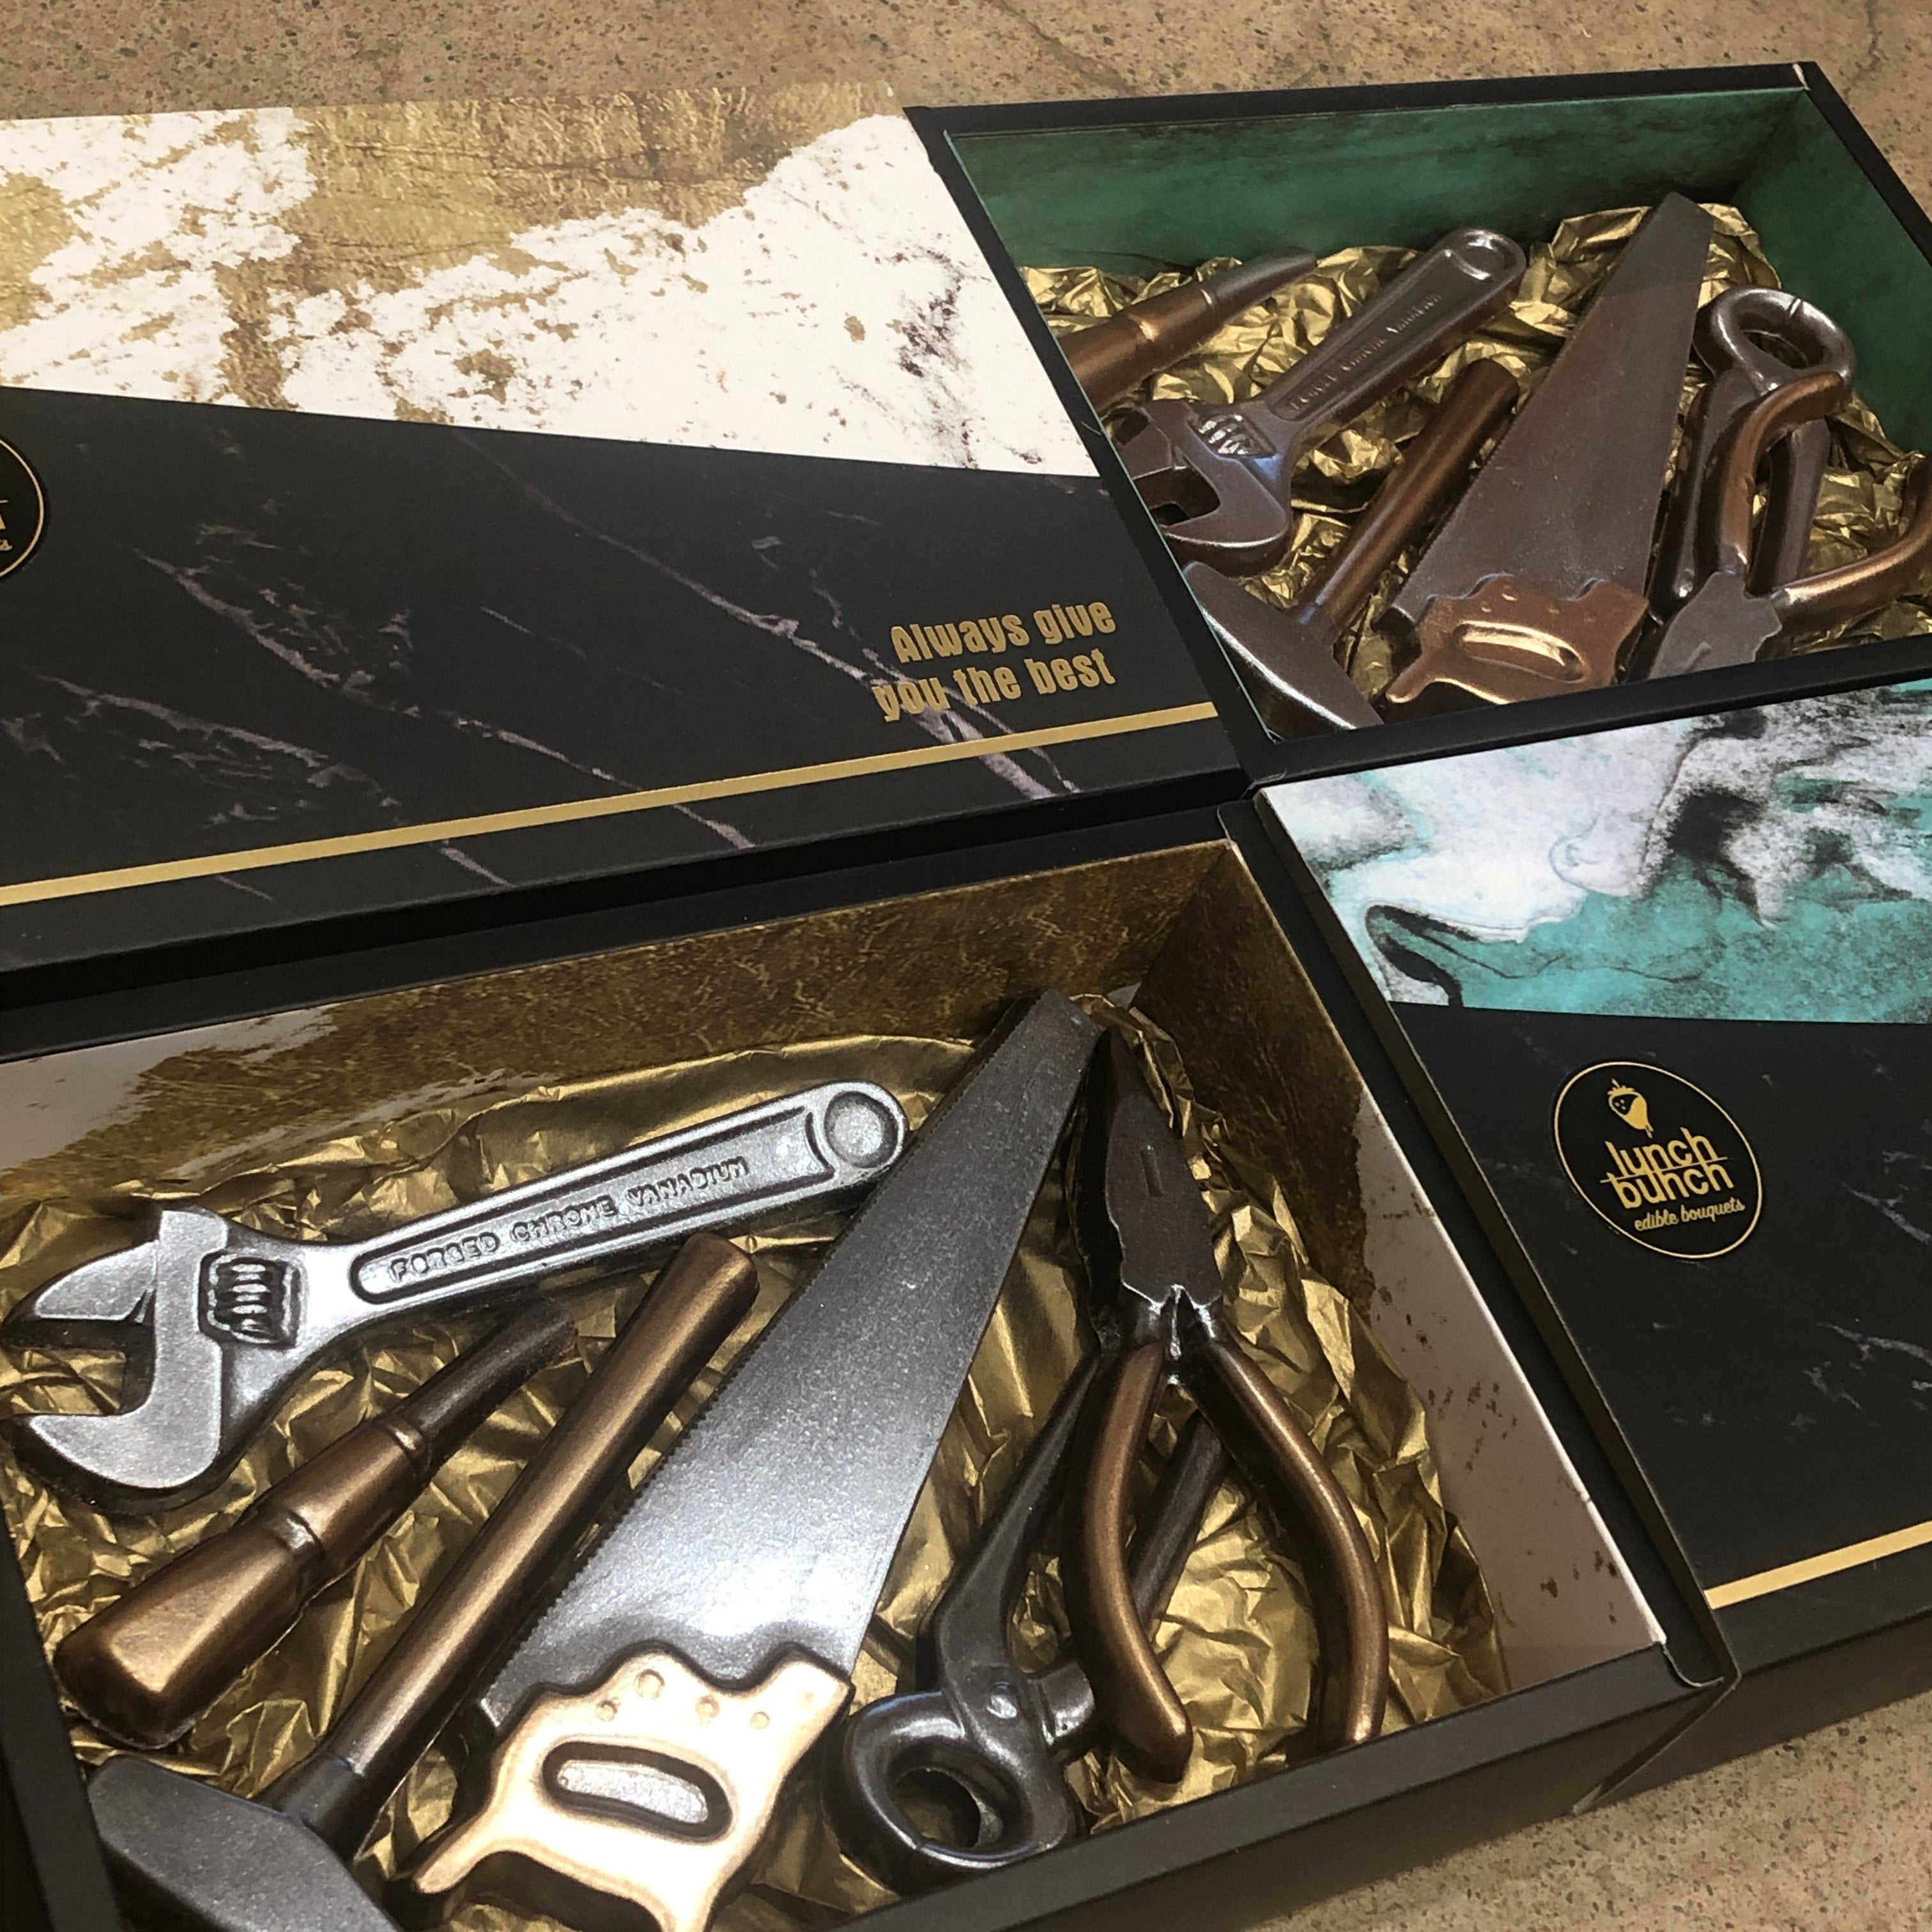 Chocolate Tools Tradie Gift Box tradis best gift box order online chocolate tools for handyman gift hamper for a builder